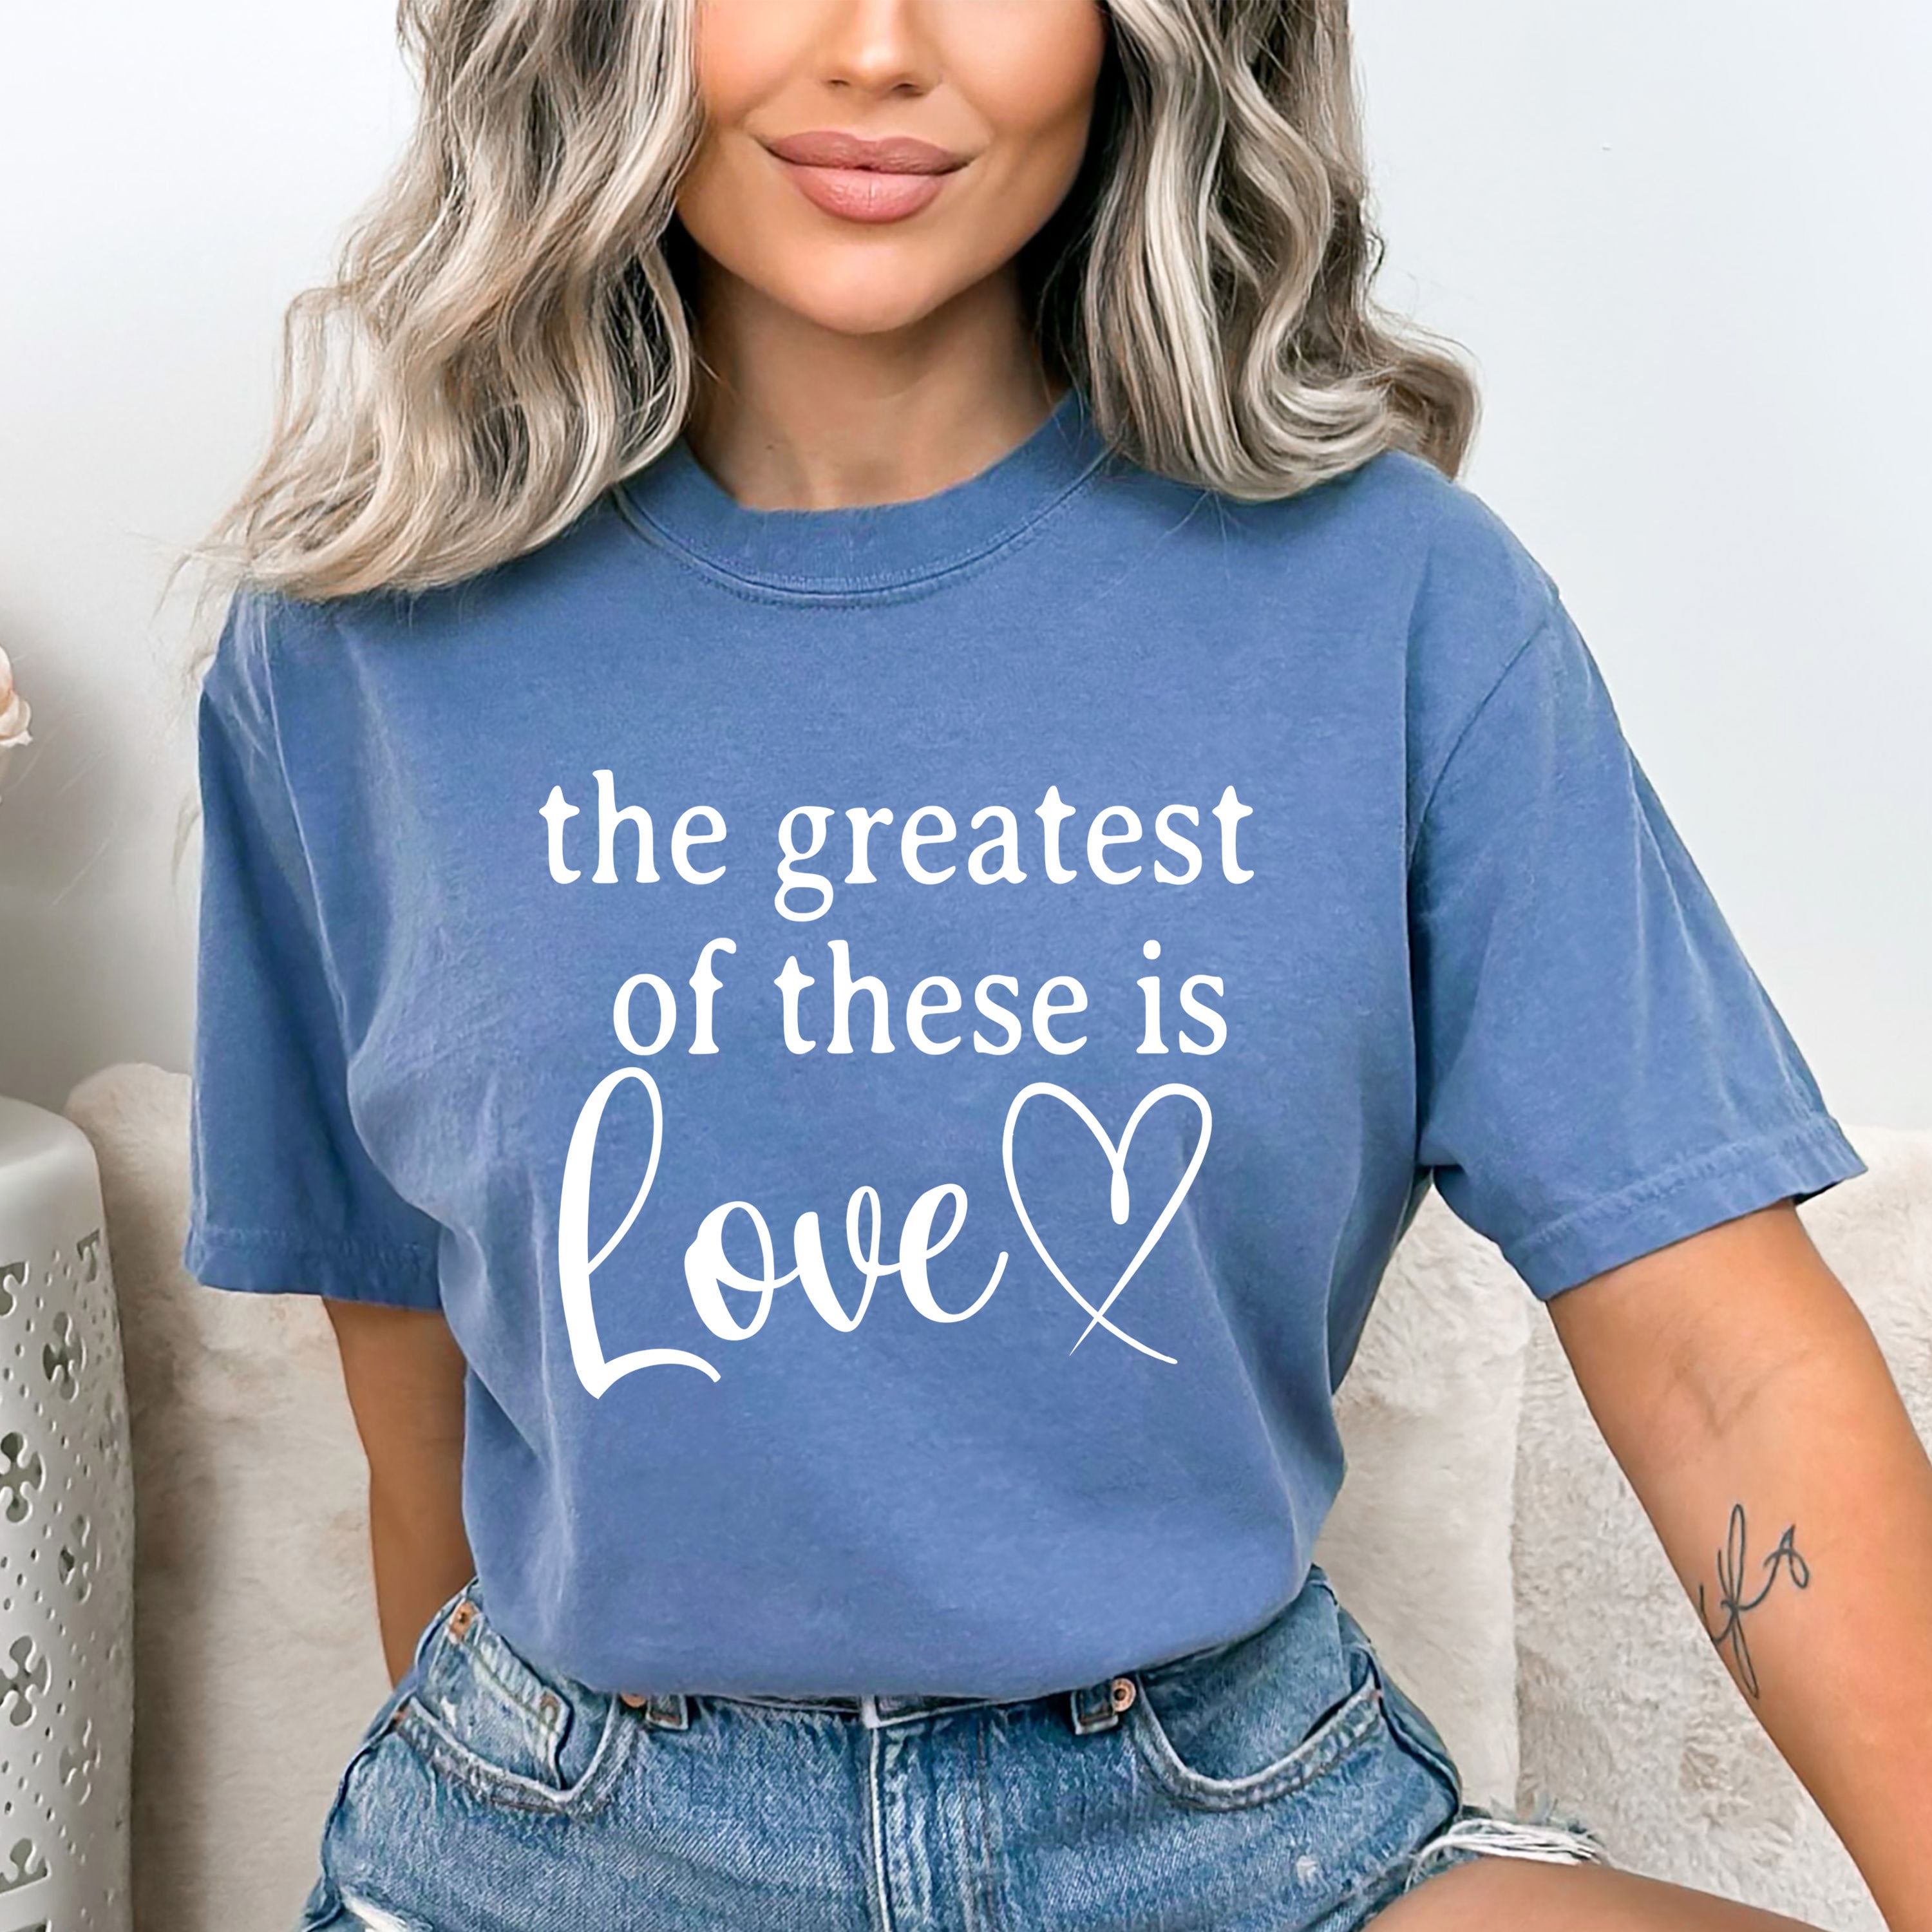 The Greatest Of These Is Love - Bella canvas